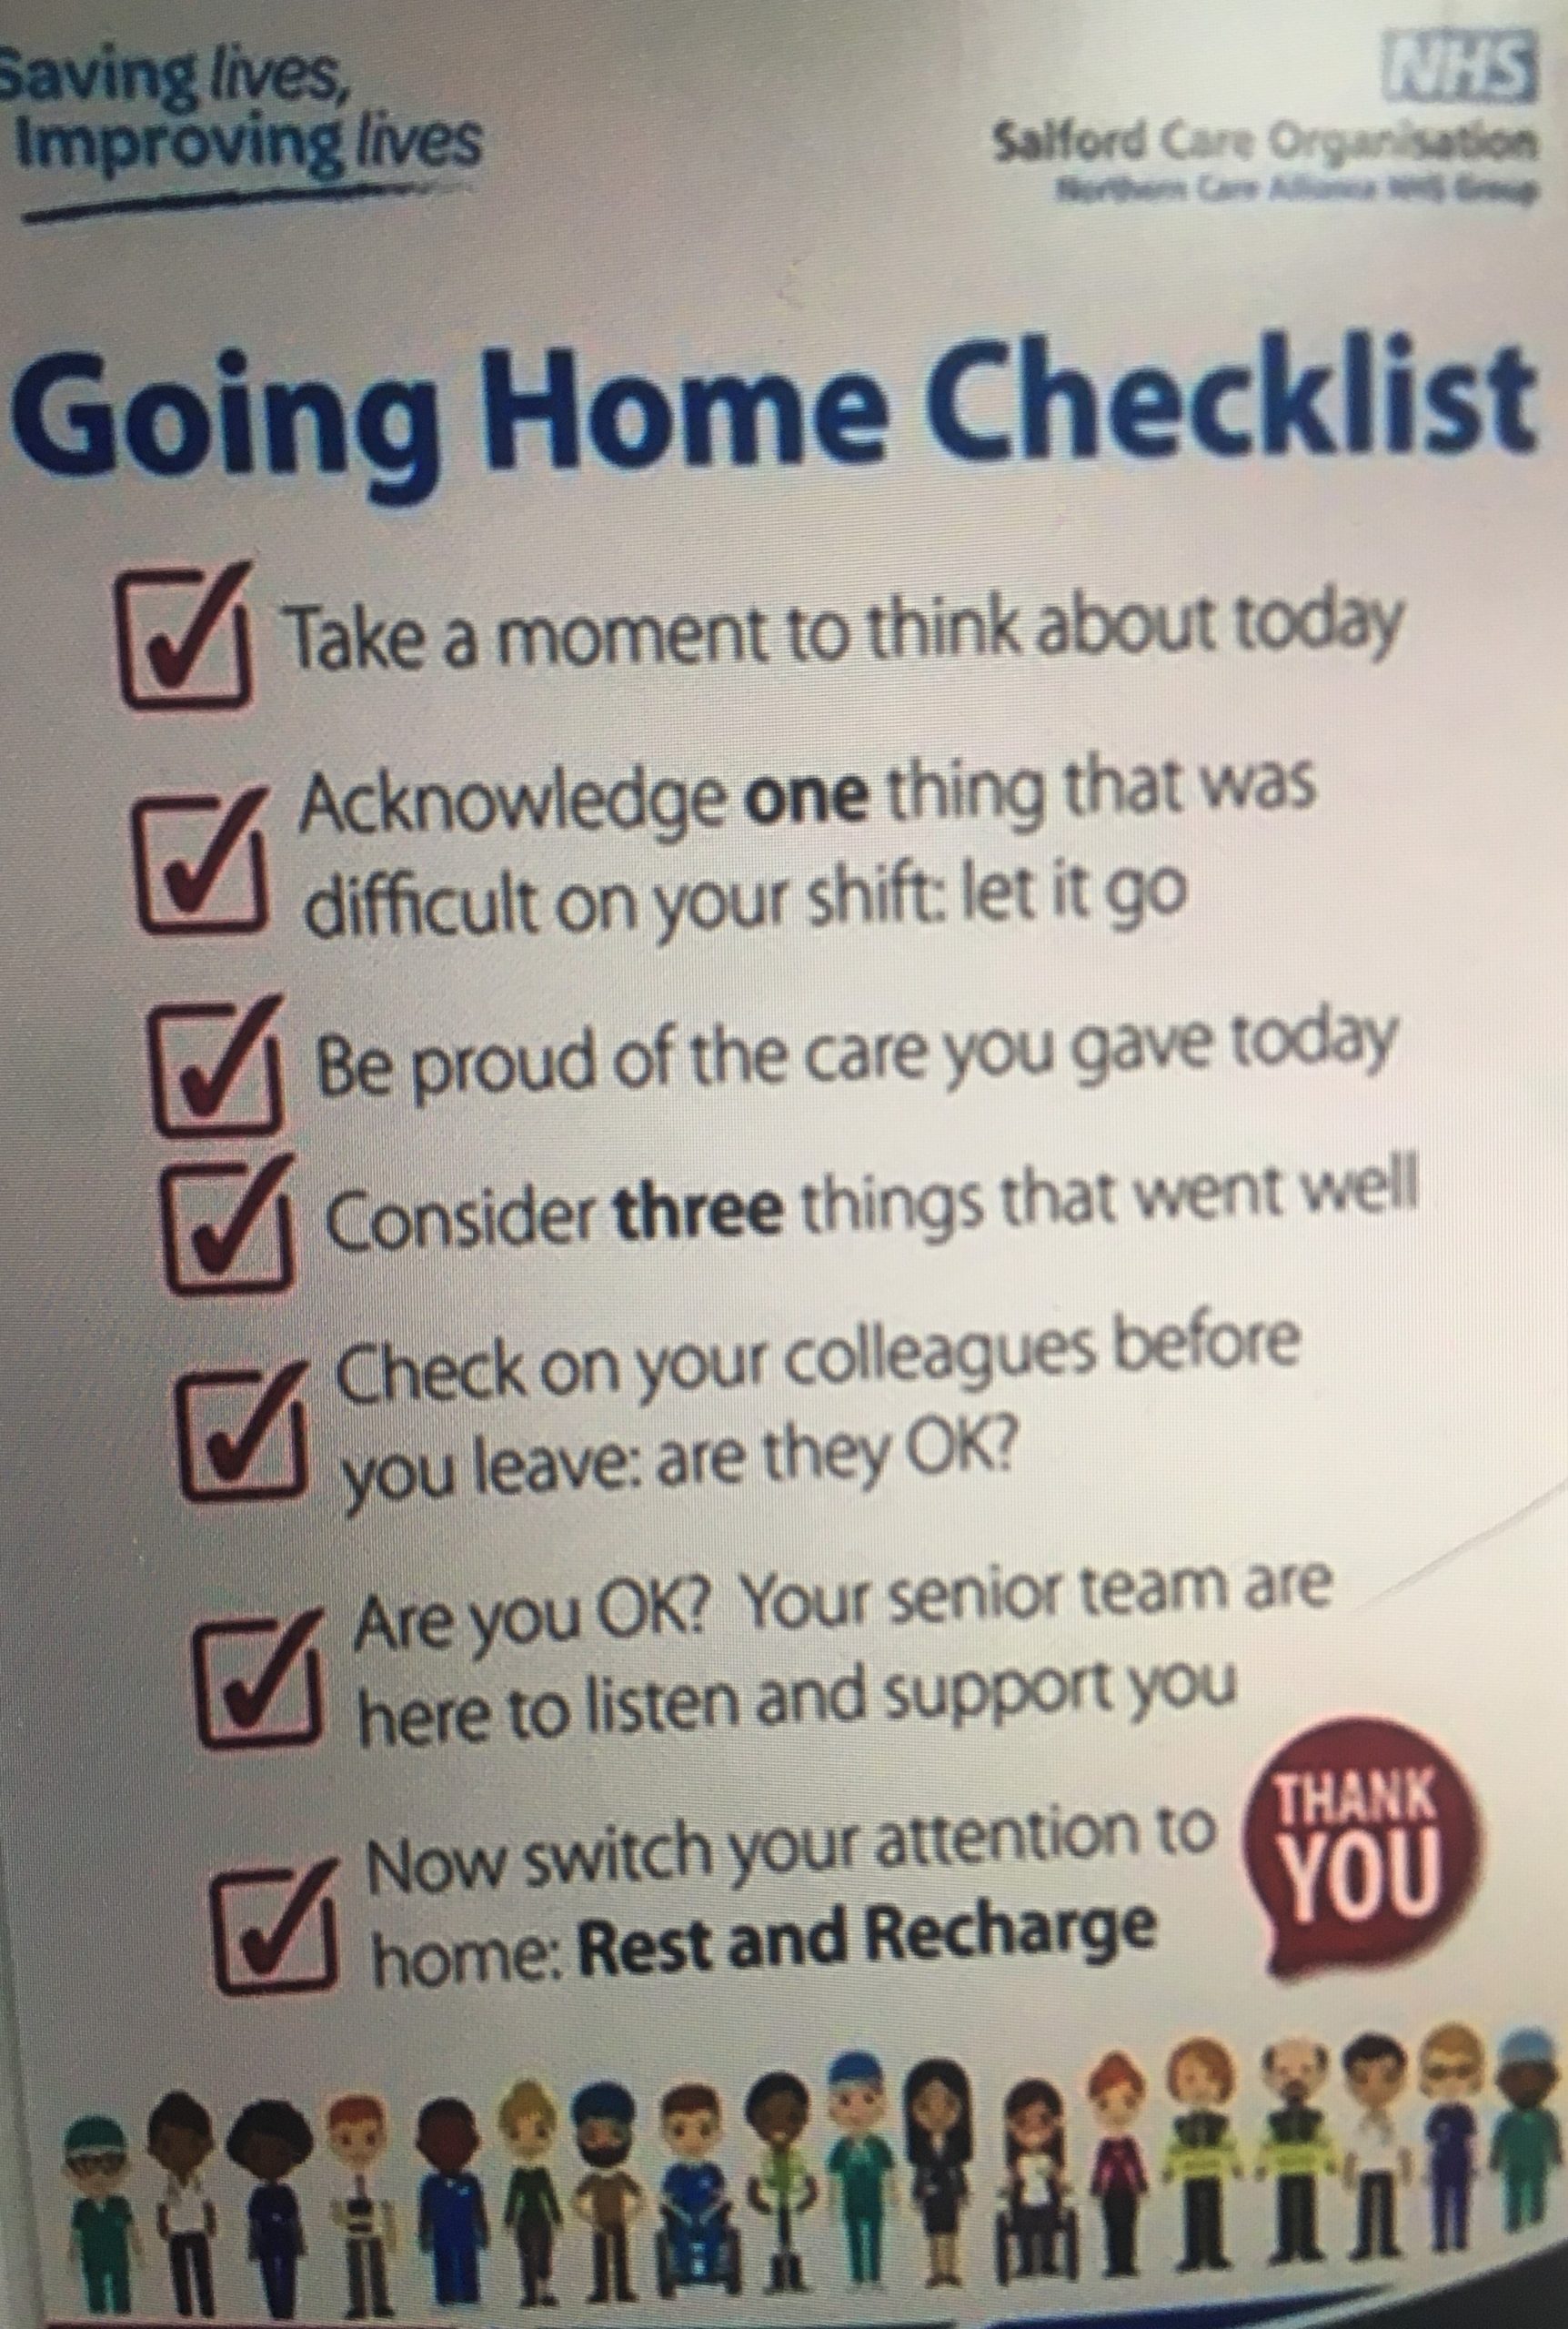 Going Home Checklist for Care Providers from NHS | Catalysis